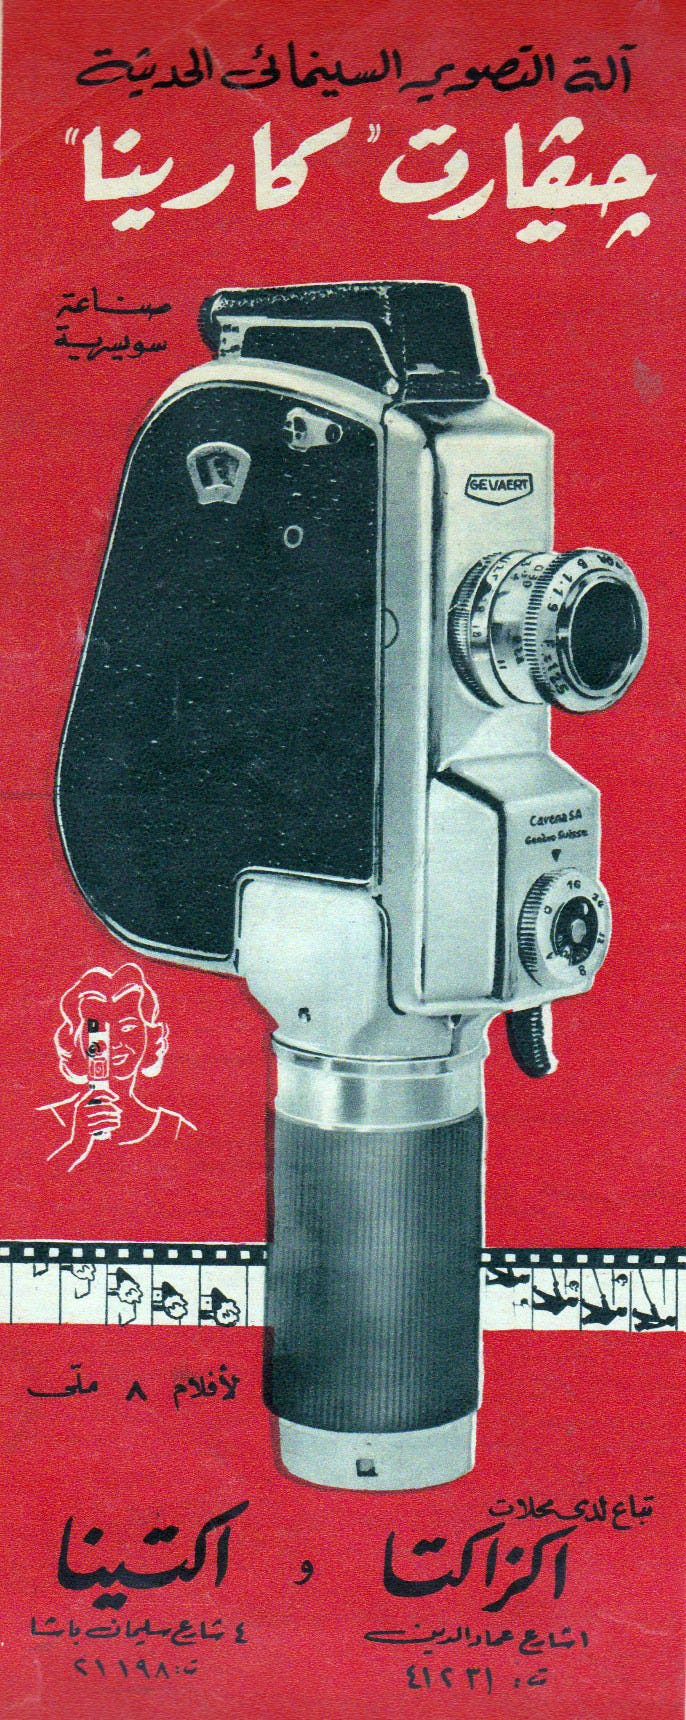 hand held video camera recorder ad (on sale at two locations downtown Cairo), 1950